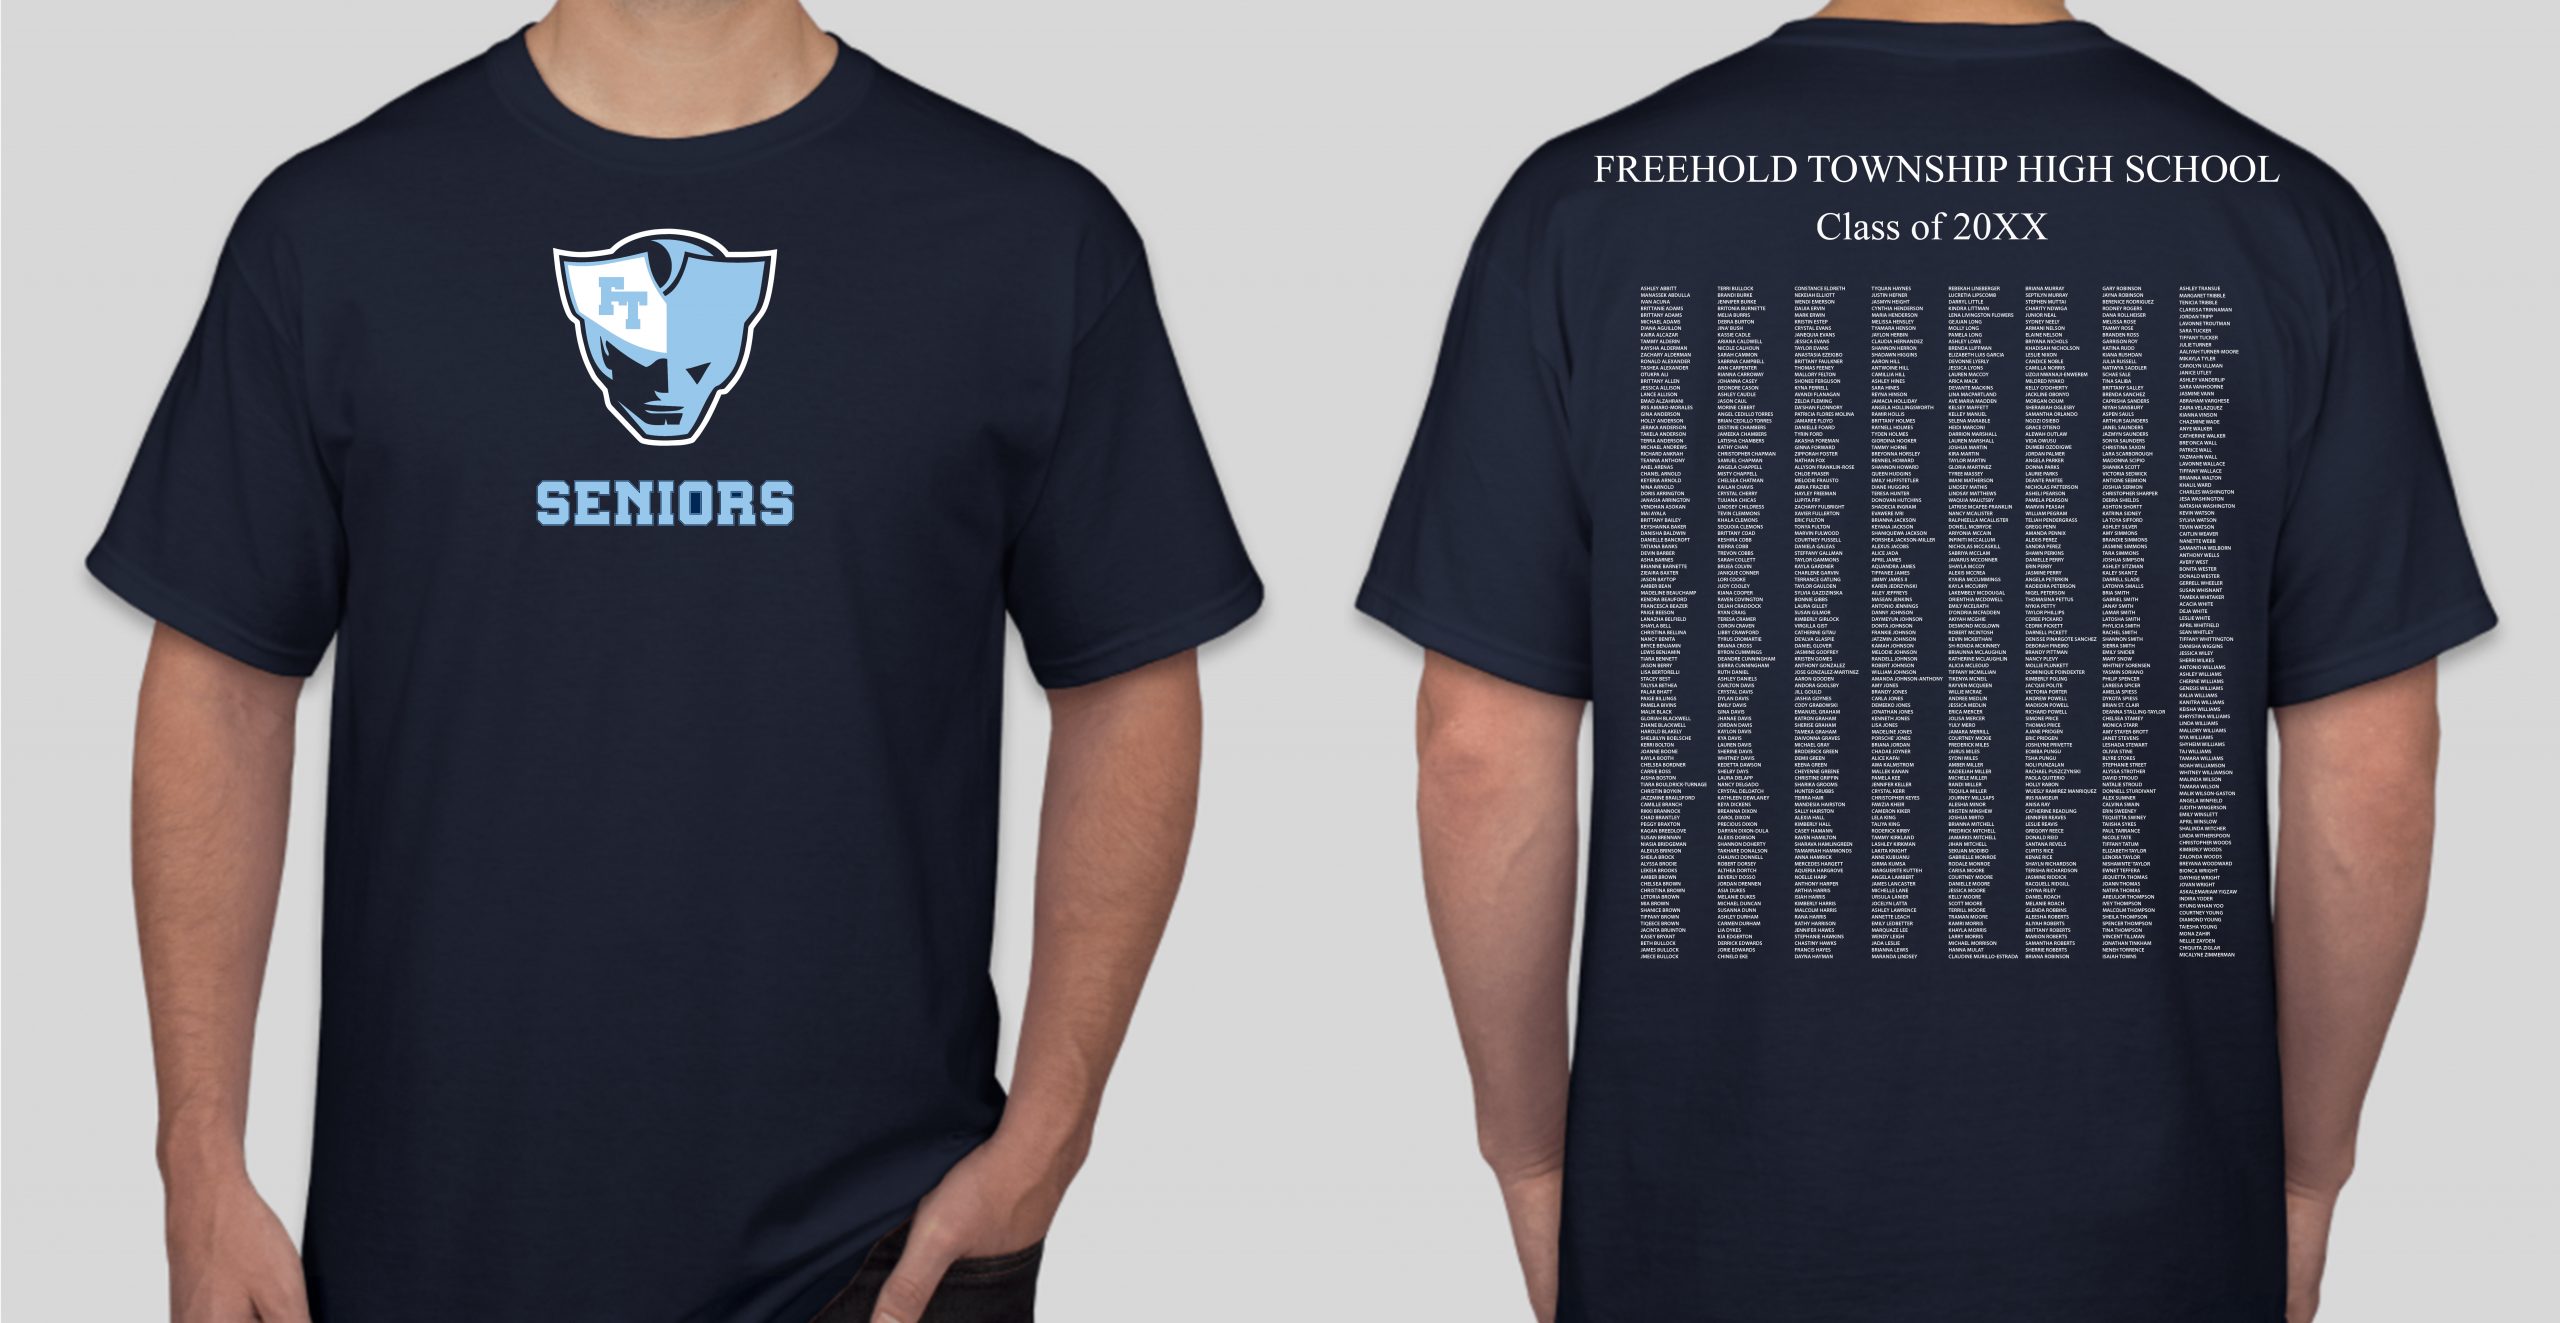 freehold township high school ranking